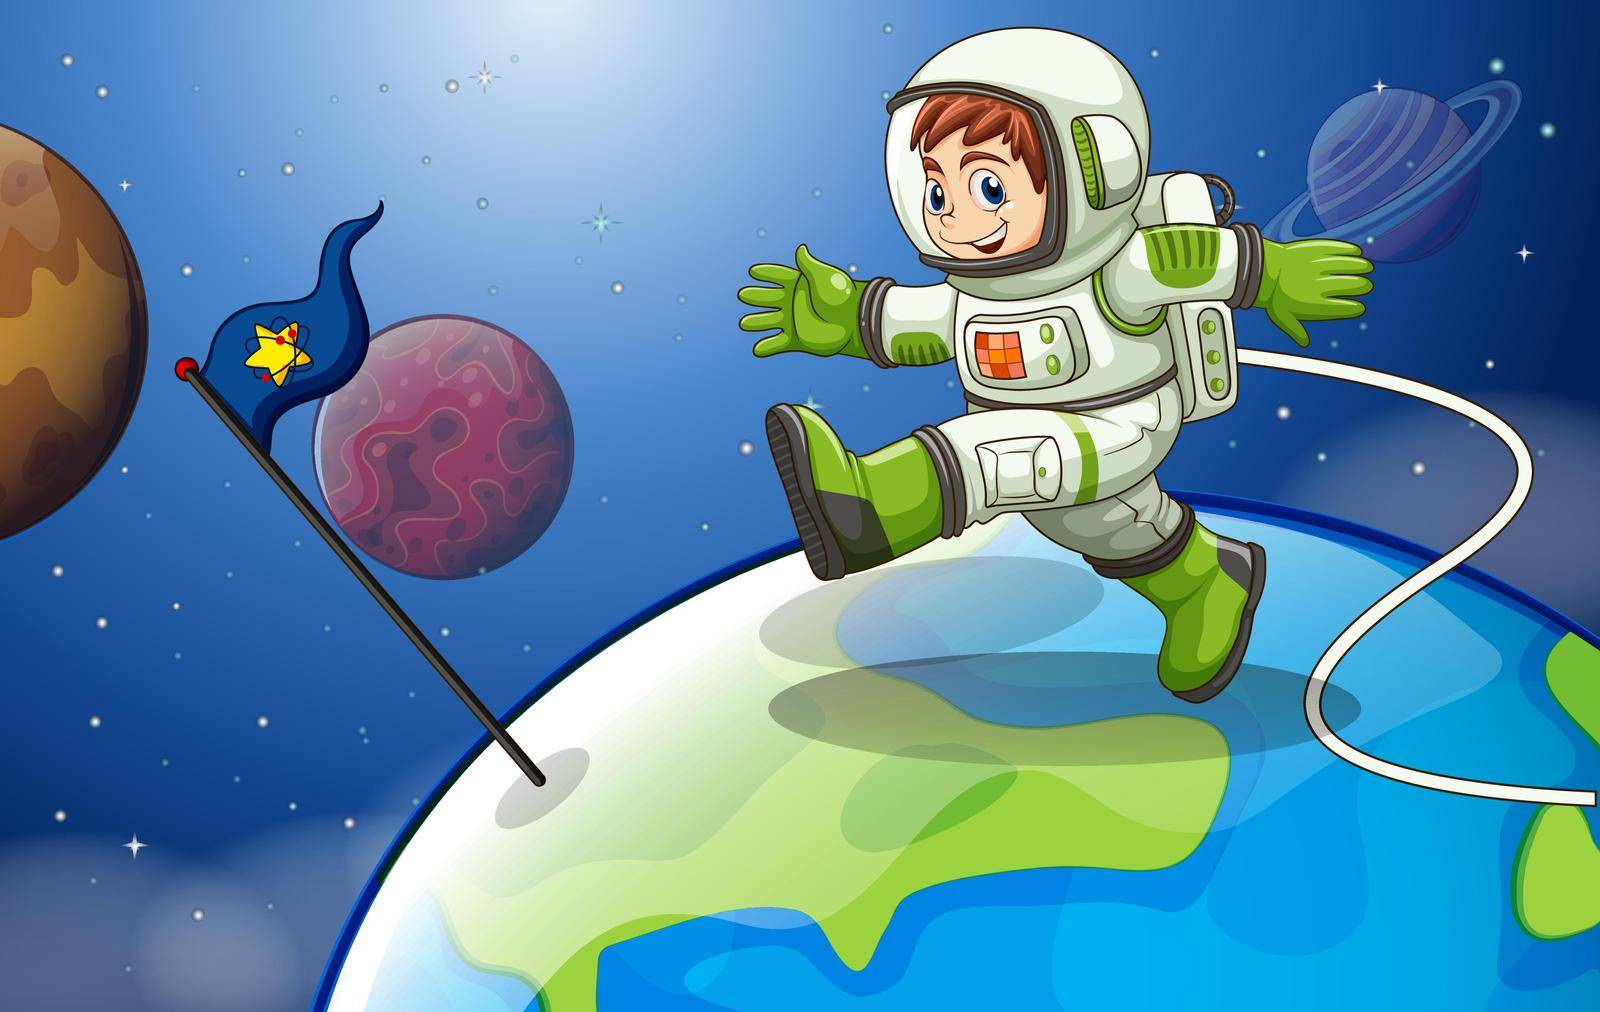 Illustration of an astronaunt in the space